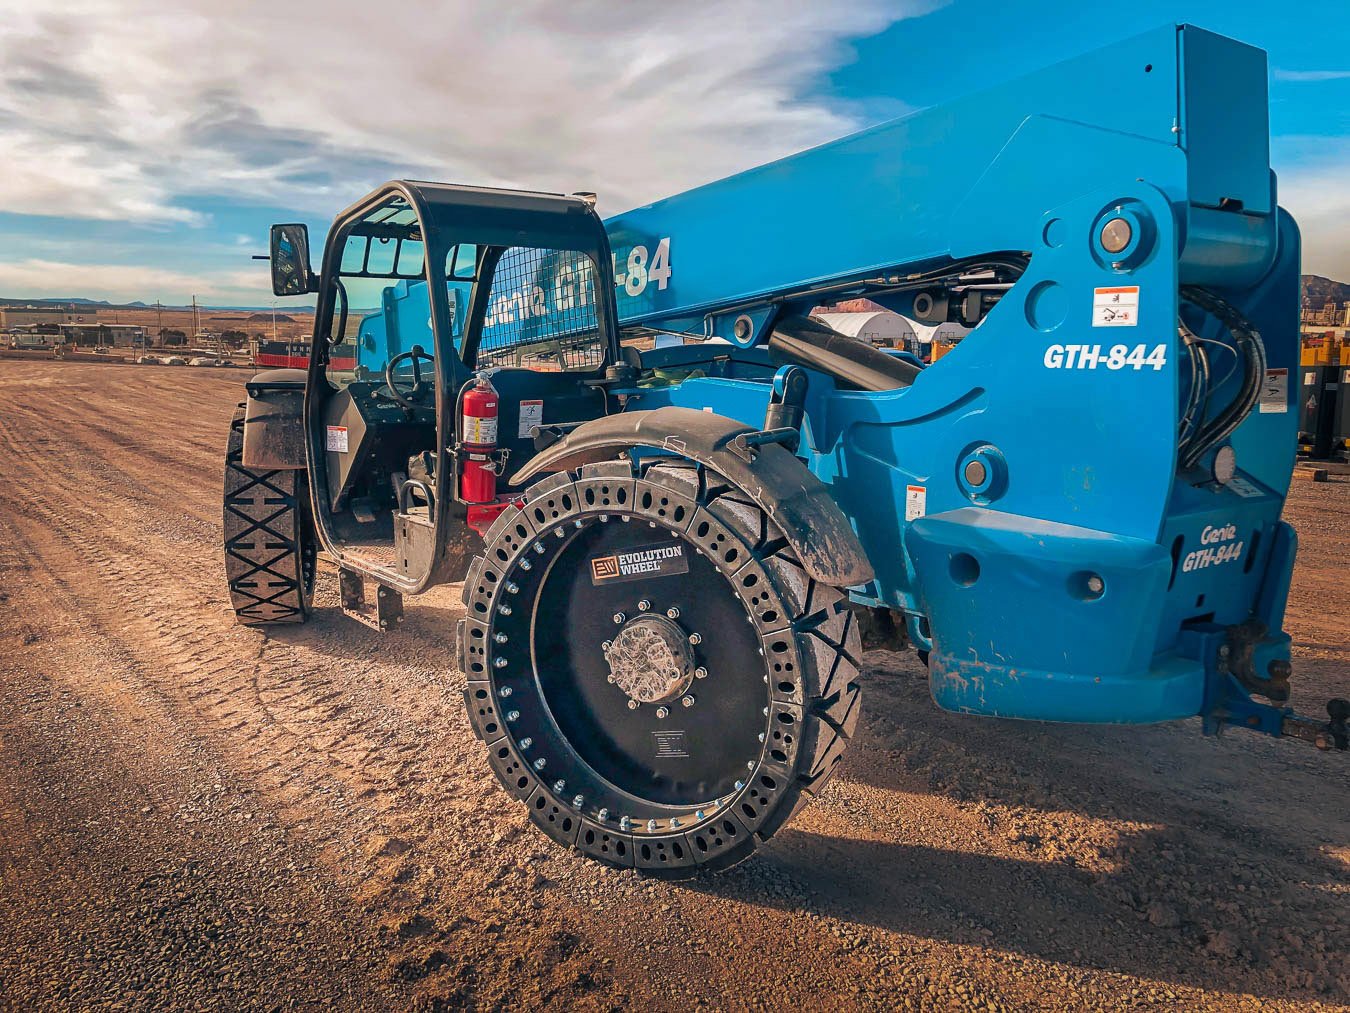 This image shows our Gradall tires for a blue Genie telehandler.